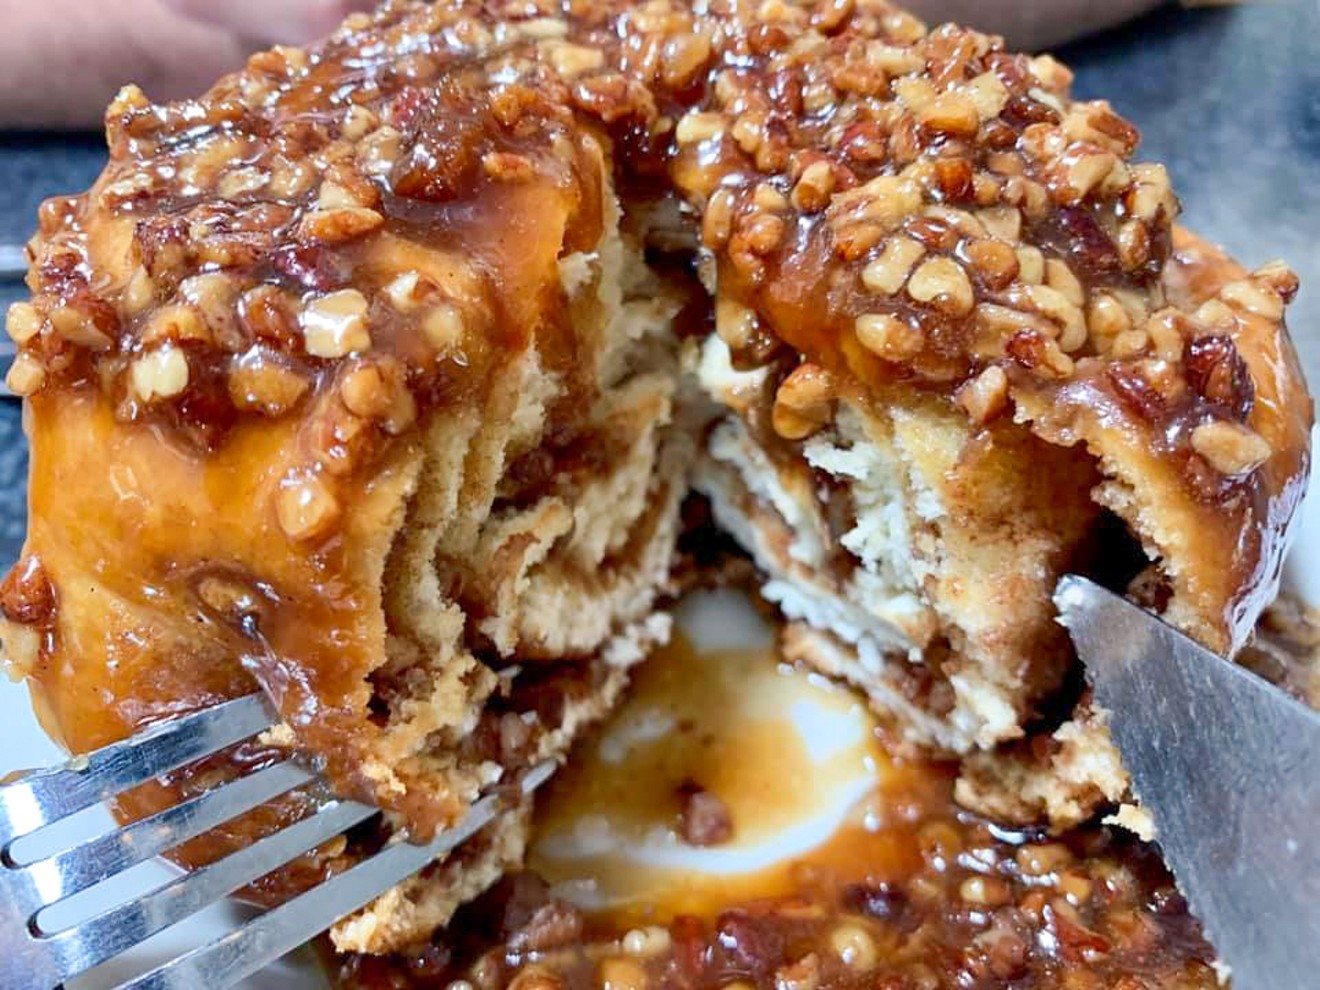 The sticky bun from Crossroads Diner: We don't want to be hackneyed and repeat what an awful year 2020 has been. That picture of a thing we can't have anymore, at least for now, says it better. FU 2020.